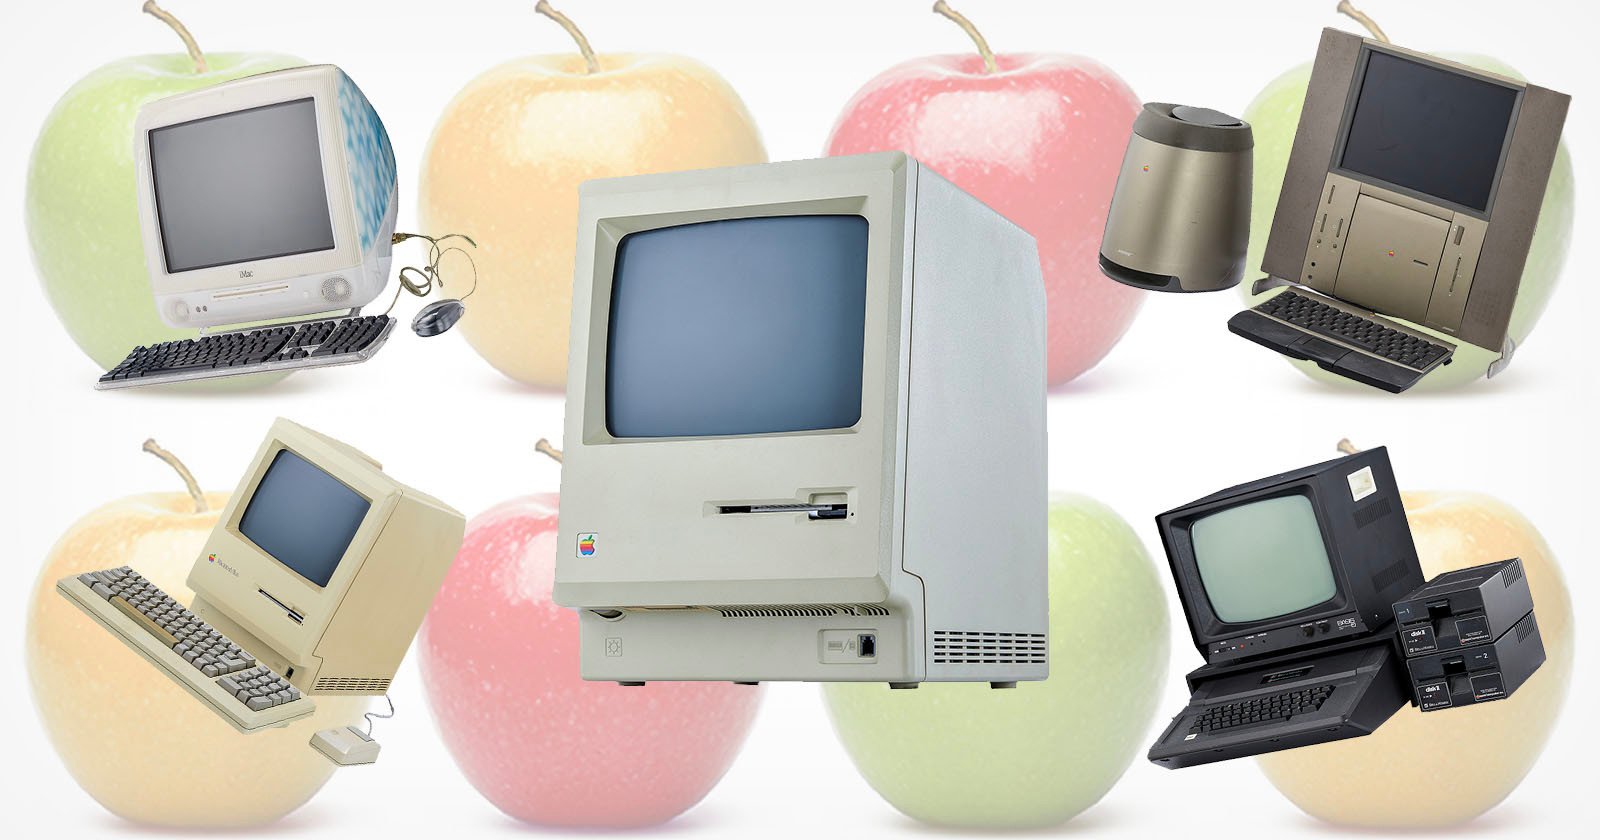 One of the Worlds Largest Collections of Classic Apple Products is for Sale